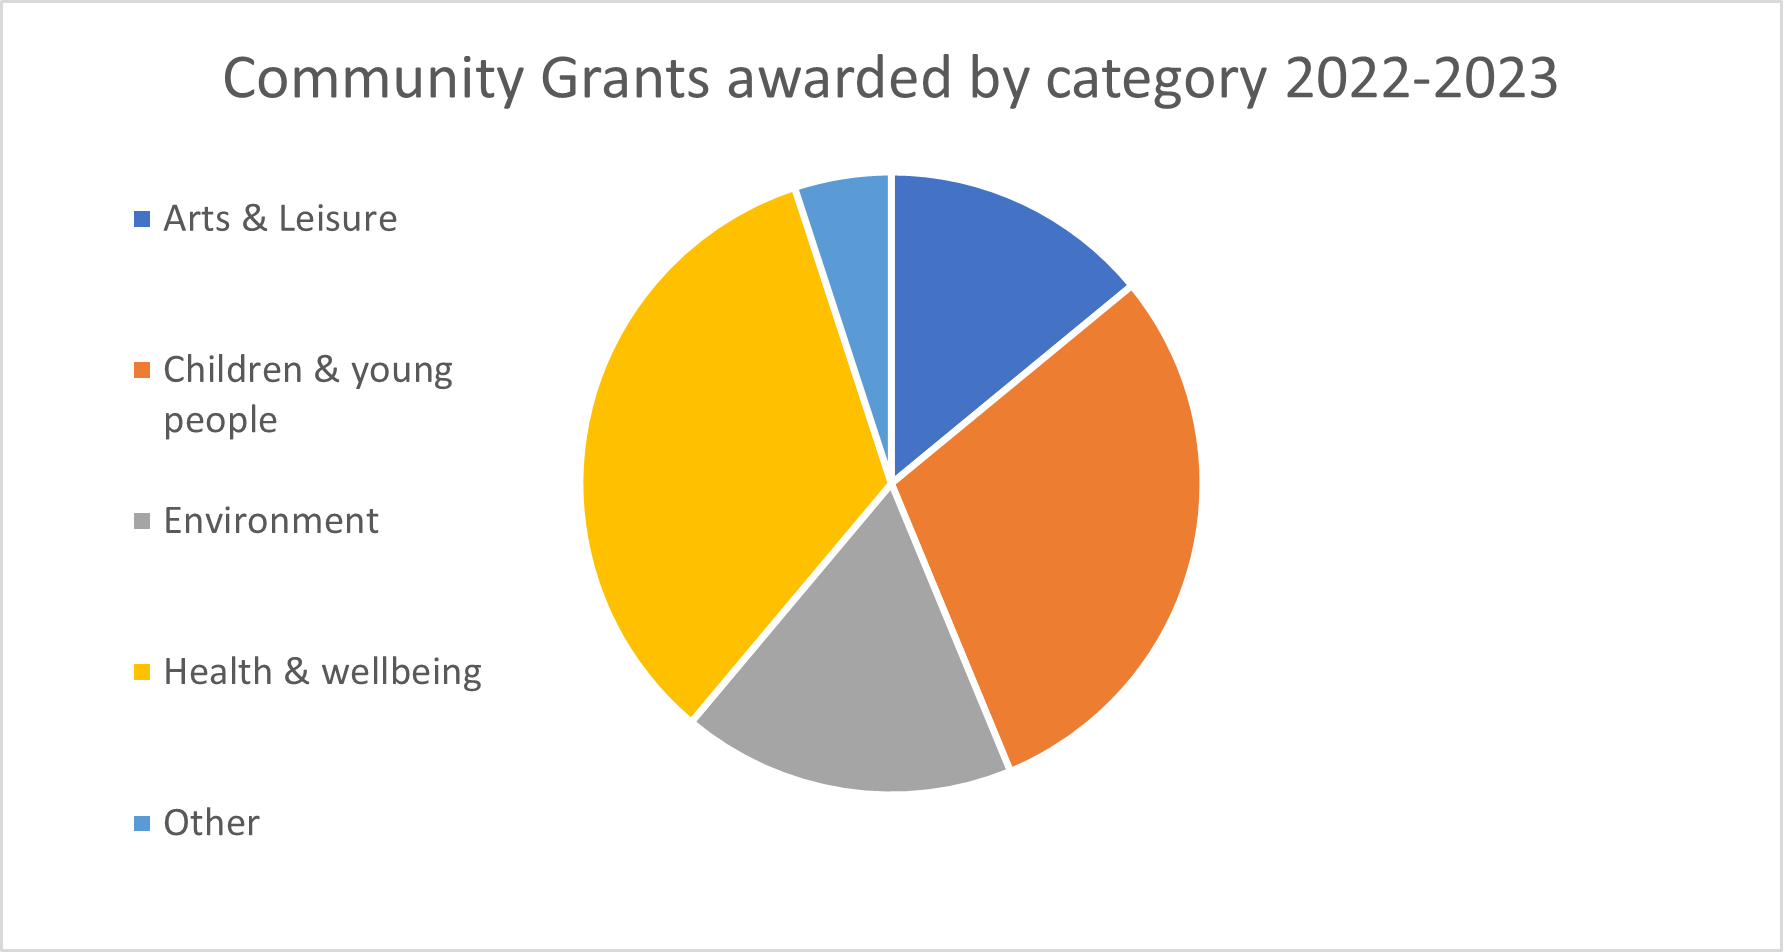 Pie chart of grants awarded